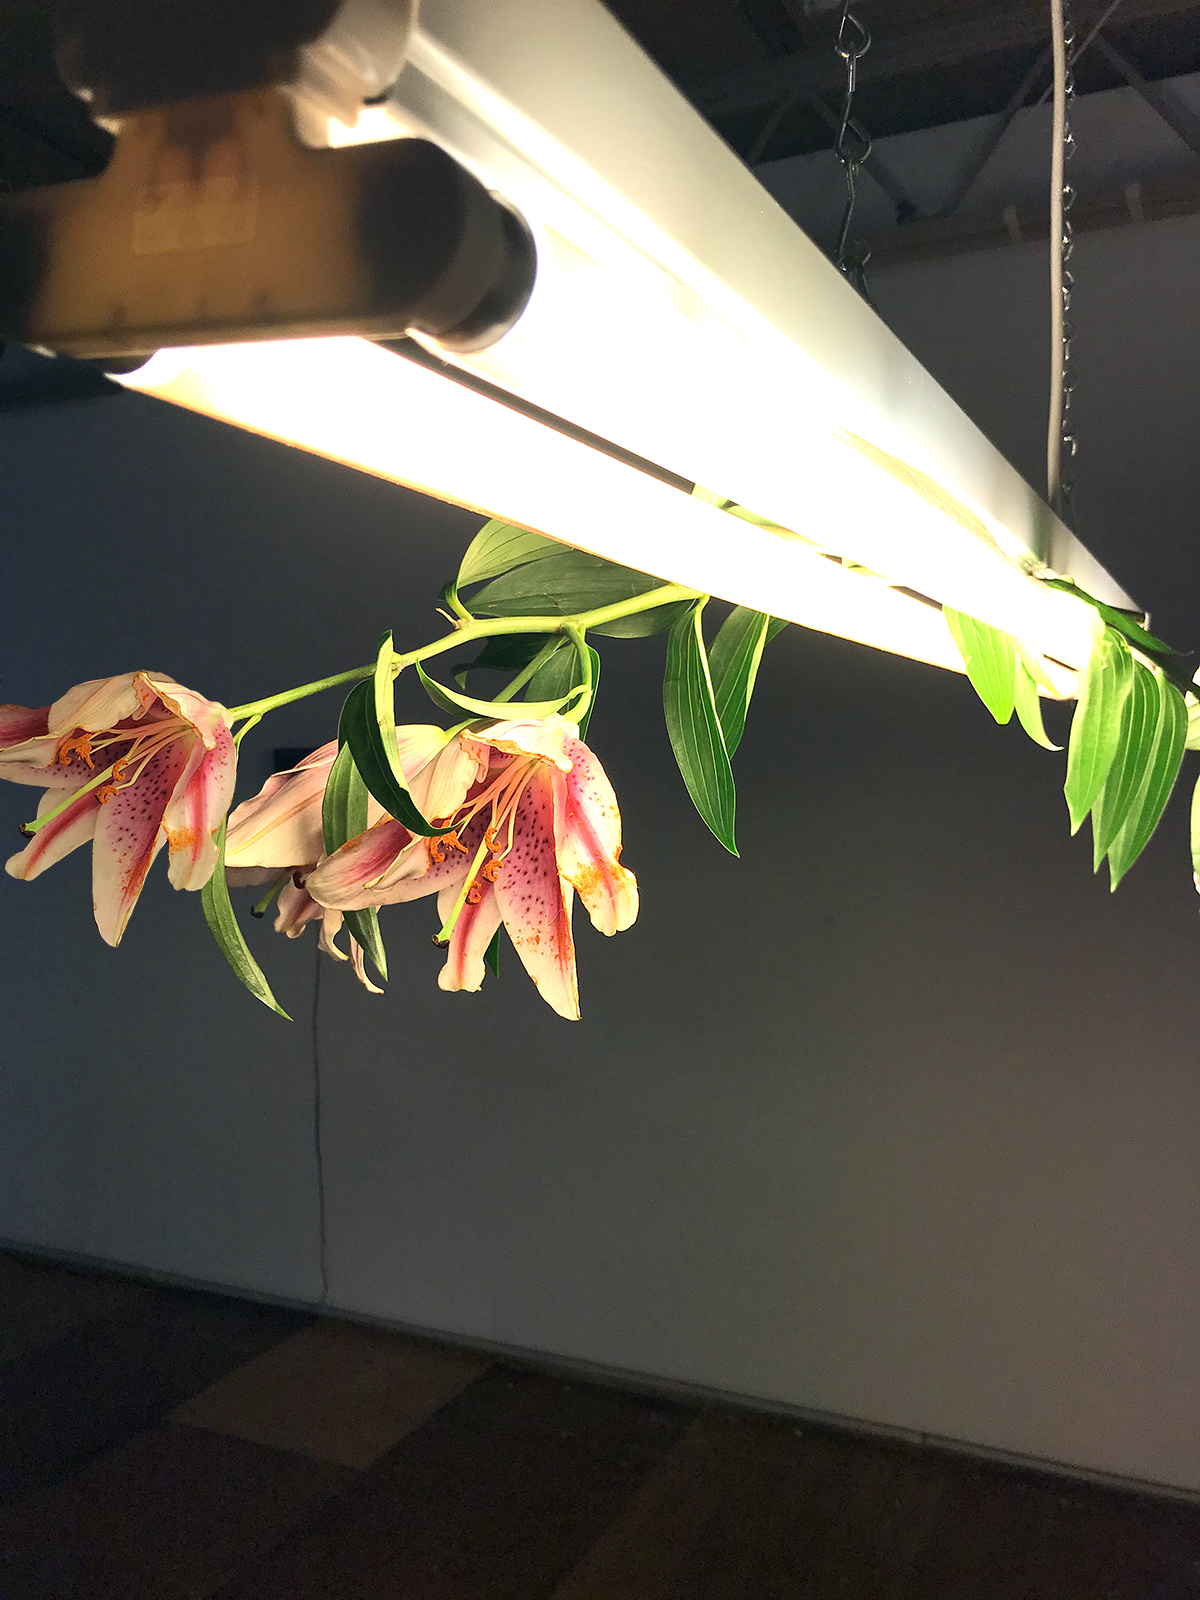 A close up image of some flowers hung over a hanging light.